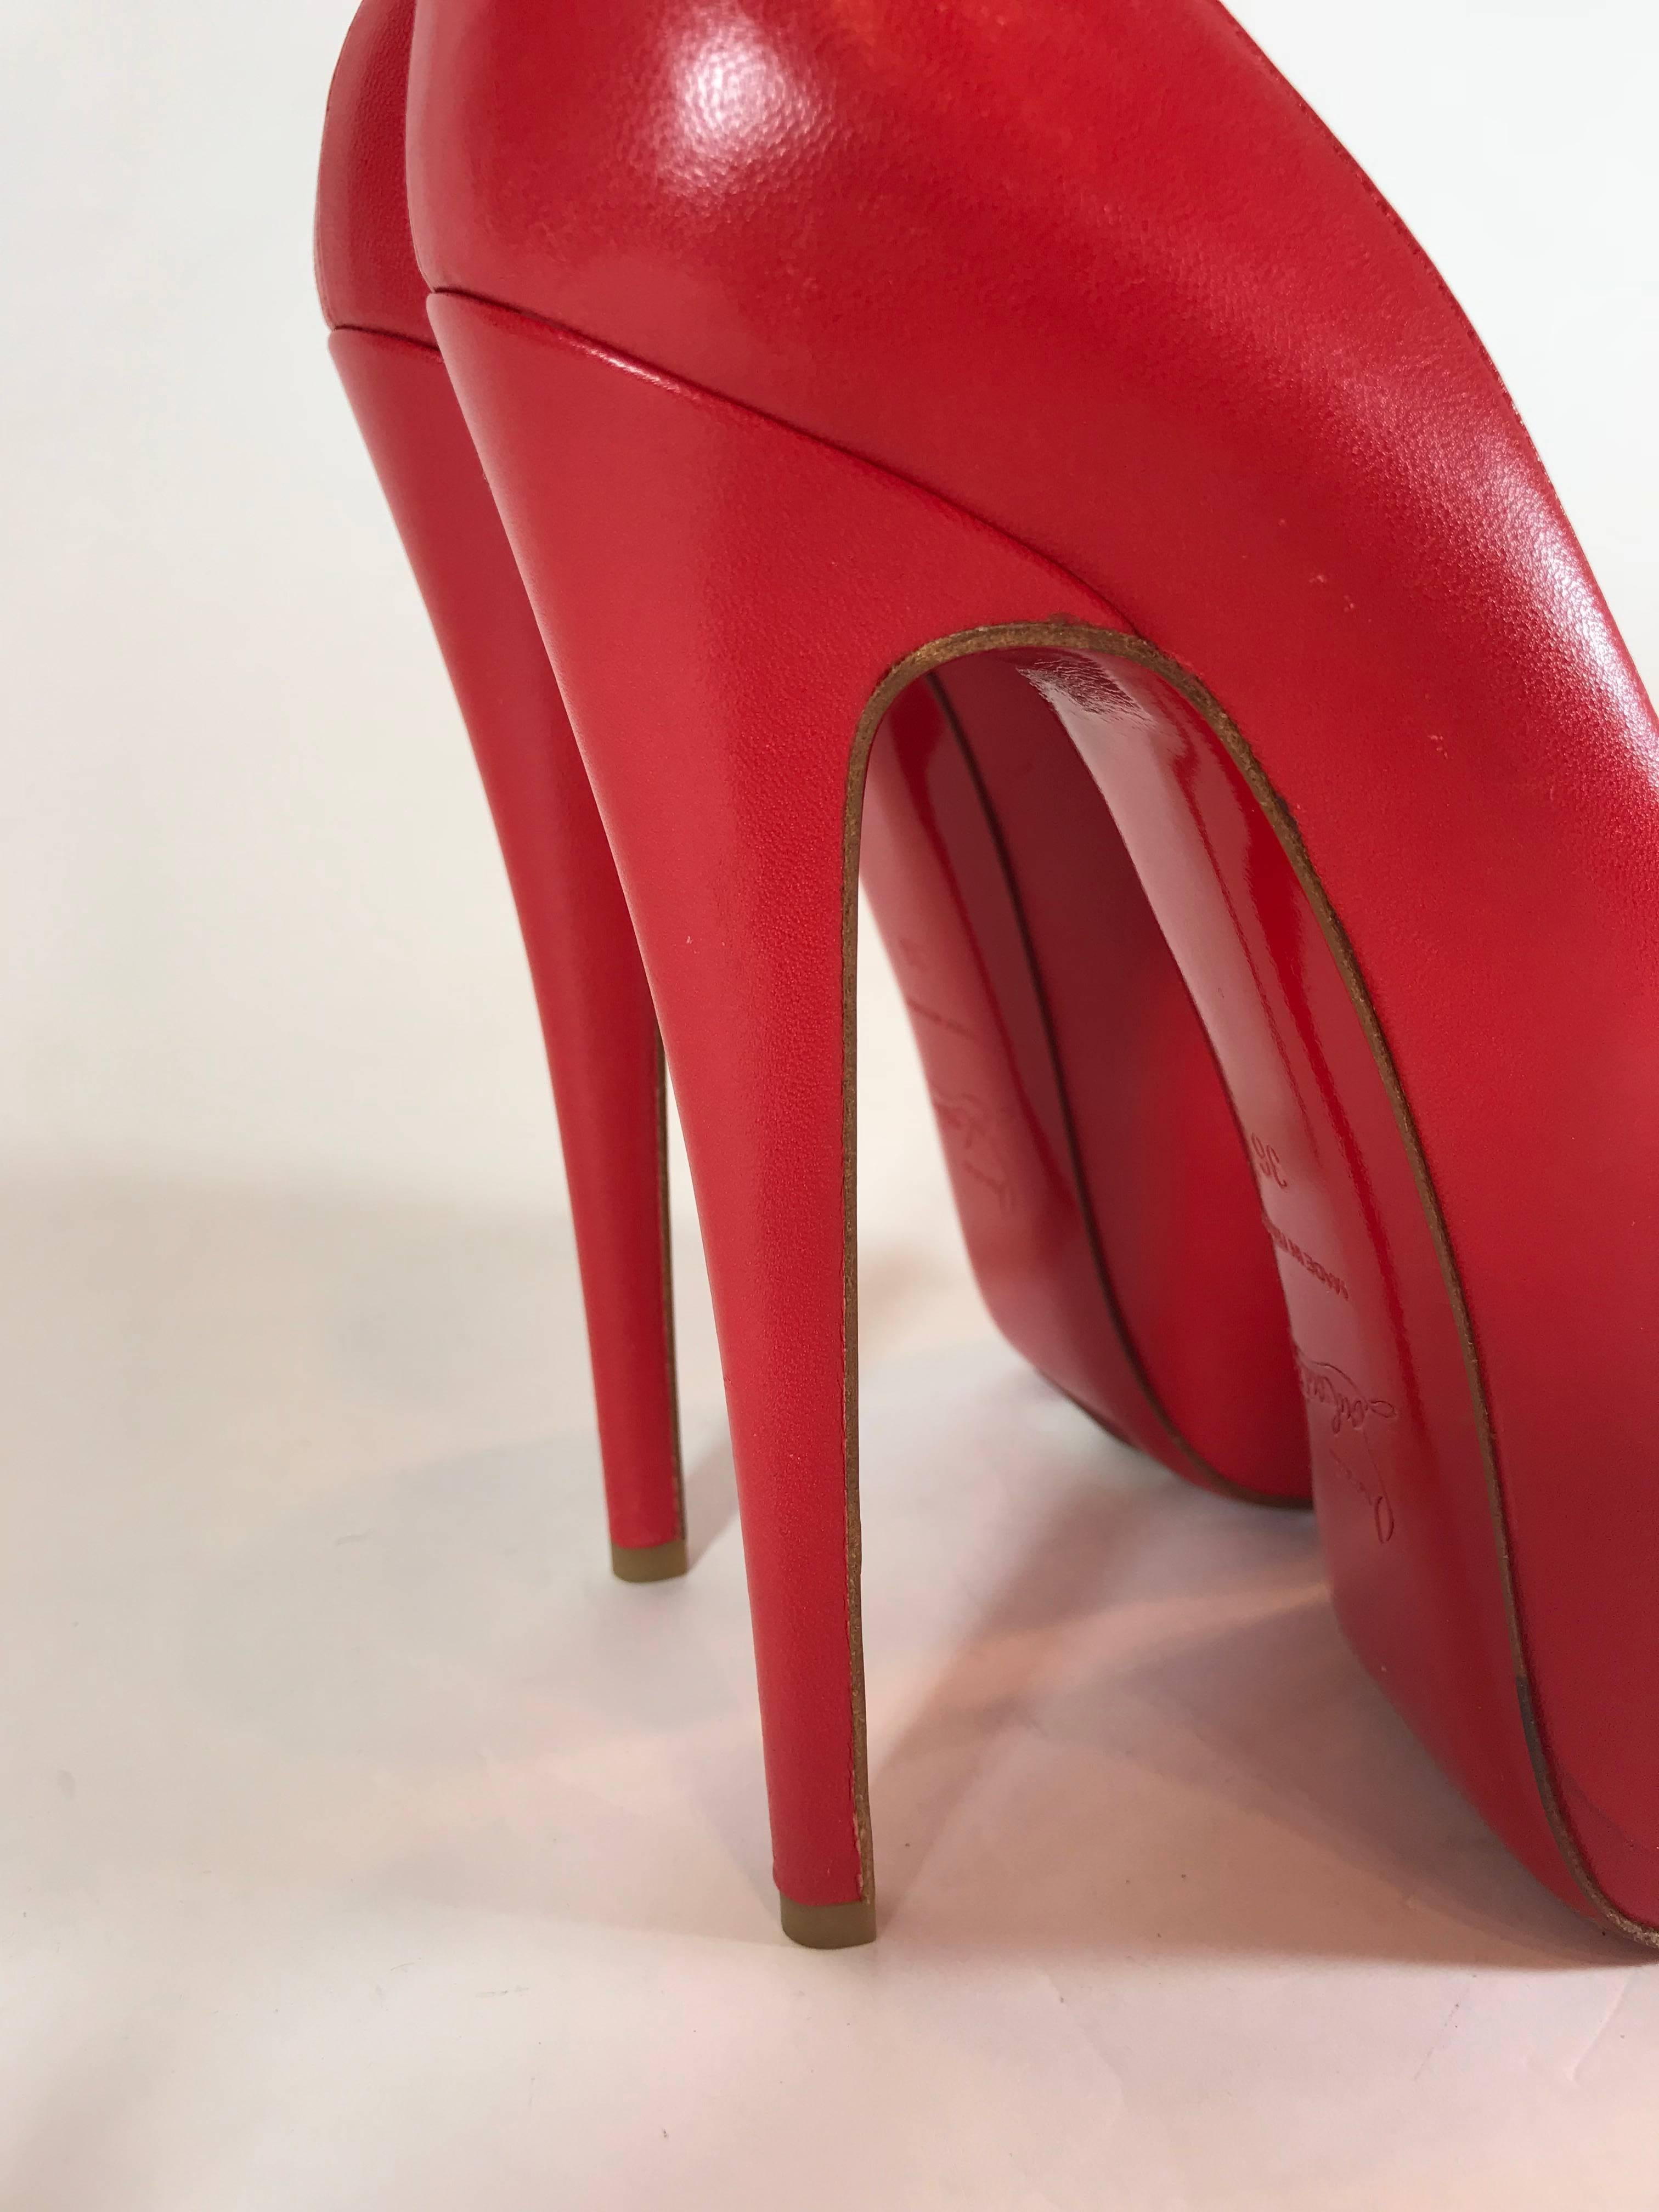 Christian Louboutin Daffodil Red Leather Pump In Excellent Condition For Sale In Roslyn, NY